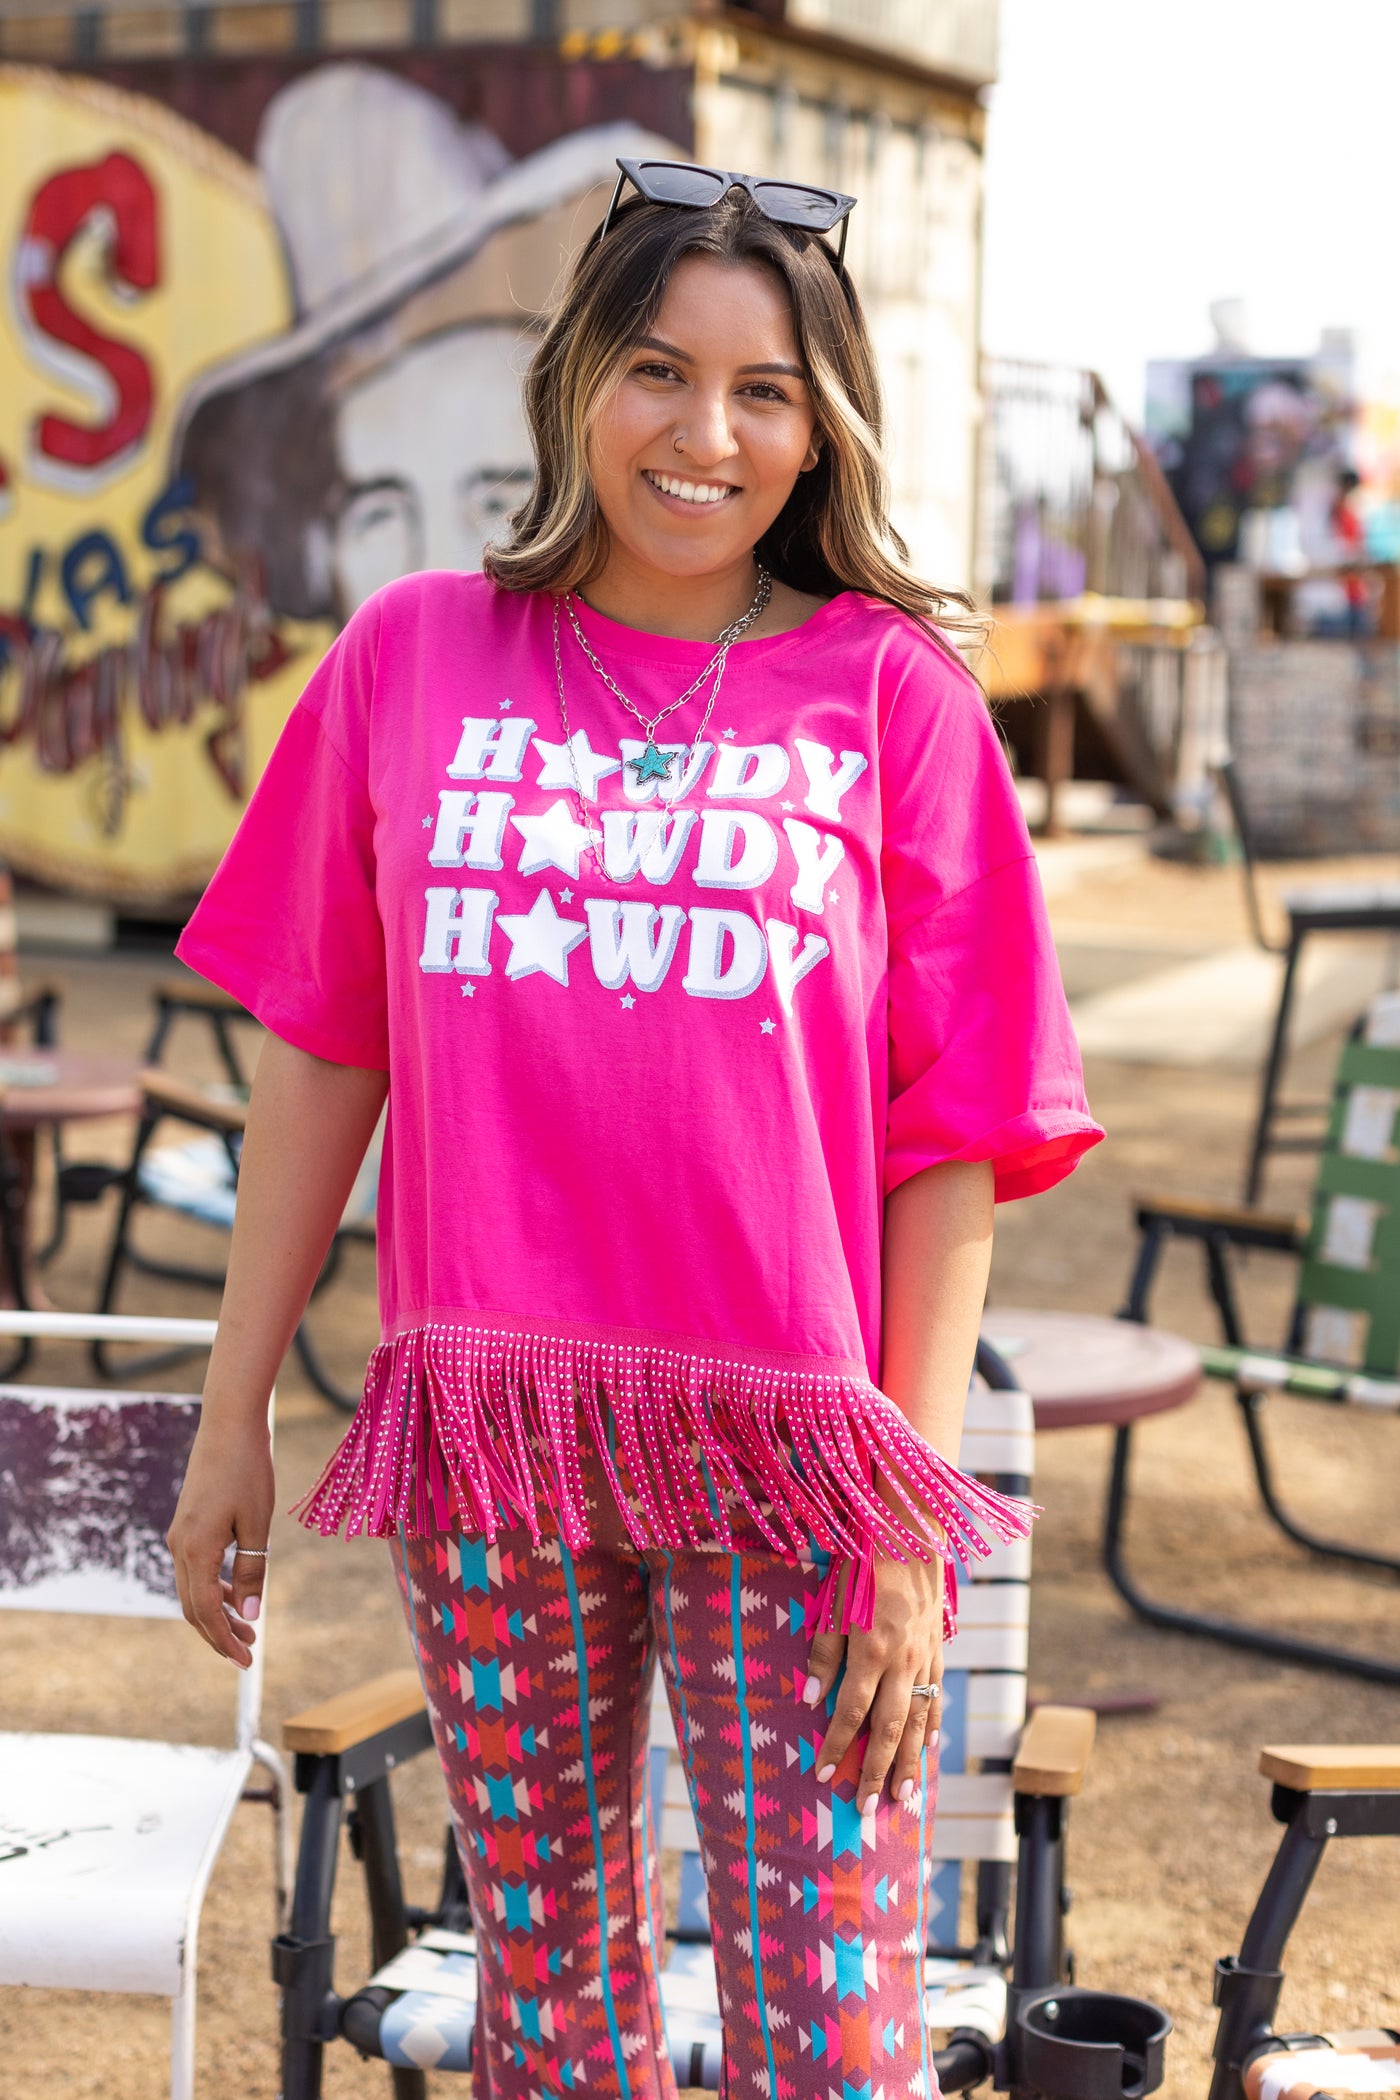 Howdy Howdy Howdy on Studded Fringe Crop Top, Hot Pink